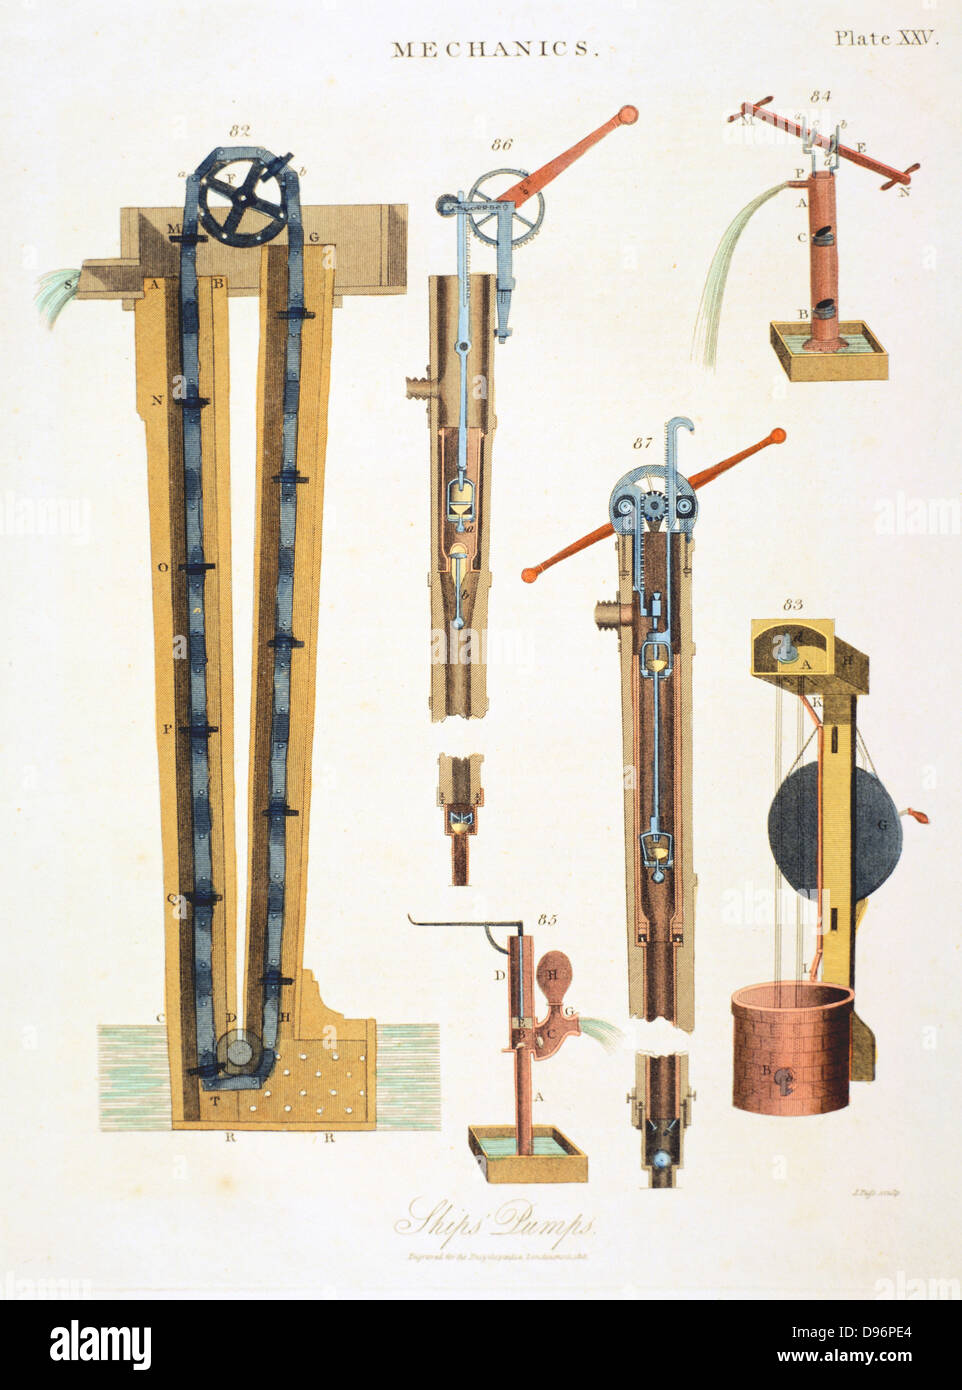 Various pumps for draining ships.  82: Chain pump. 84: Suction pump. 85: Force pump.  From 'Encyclopaedia Londinensis', (London, c1816). Engraving. Stock Photo